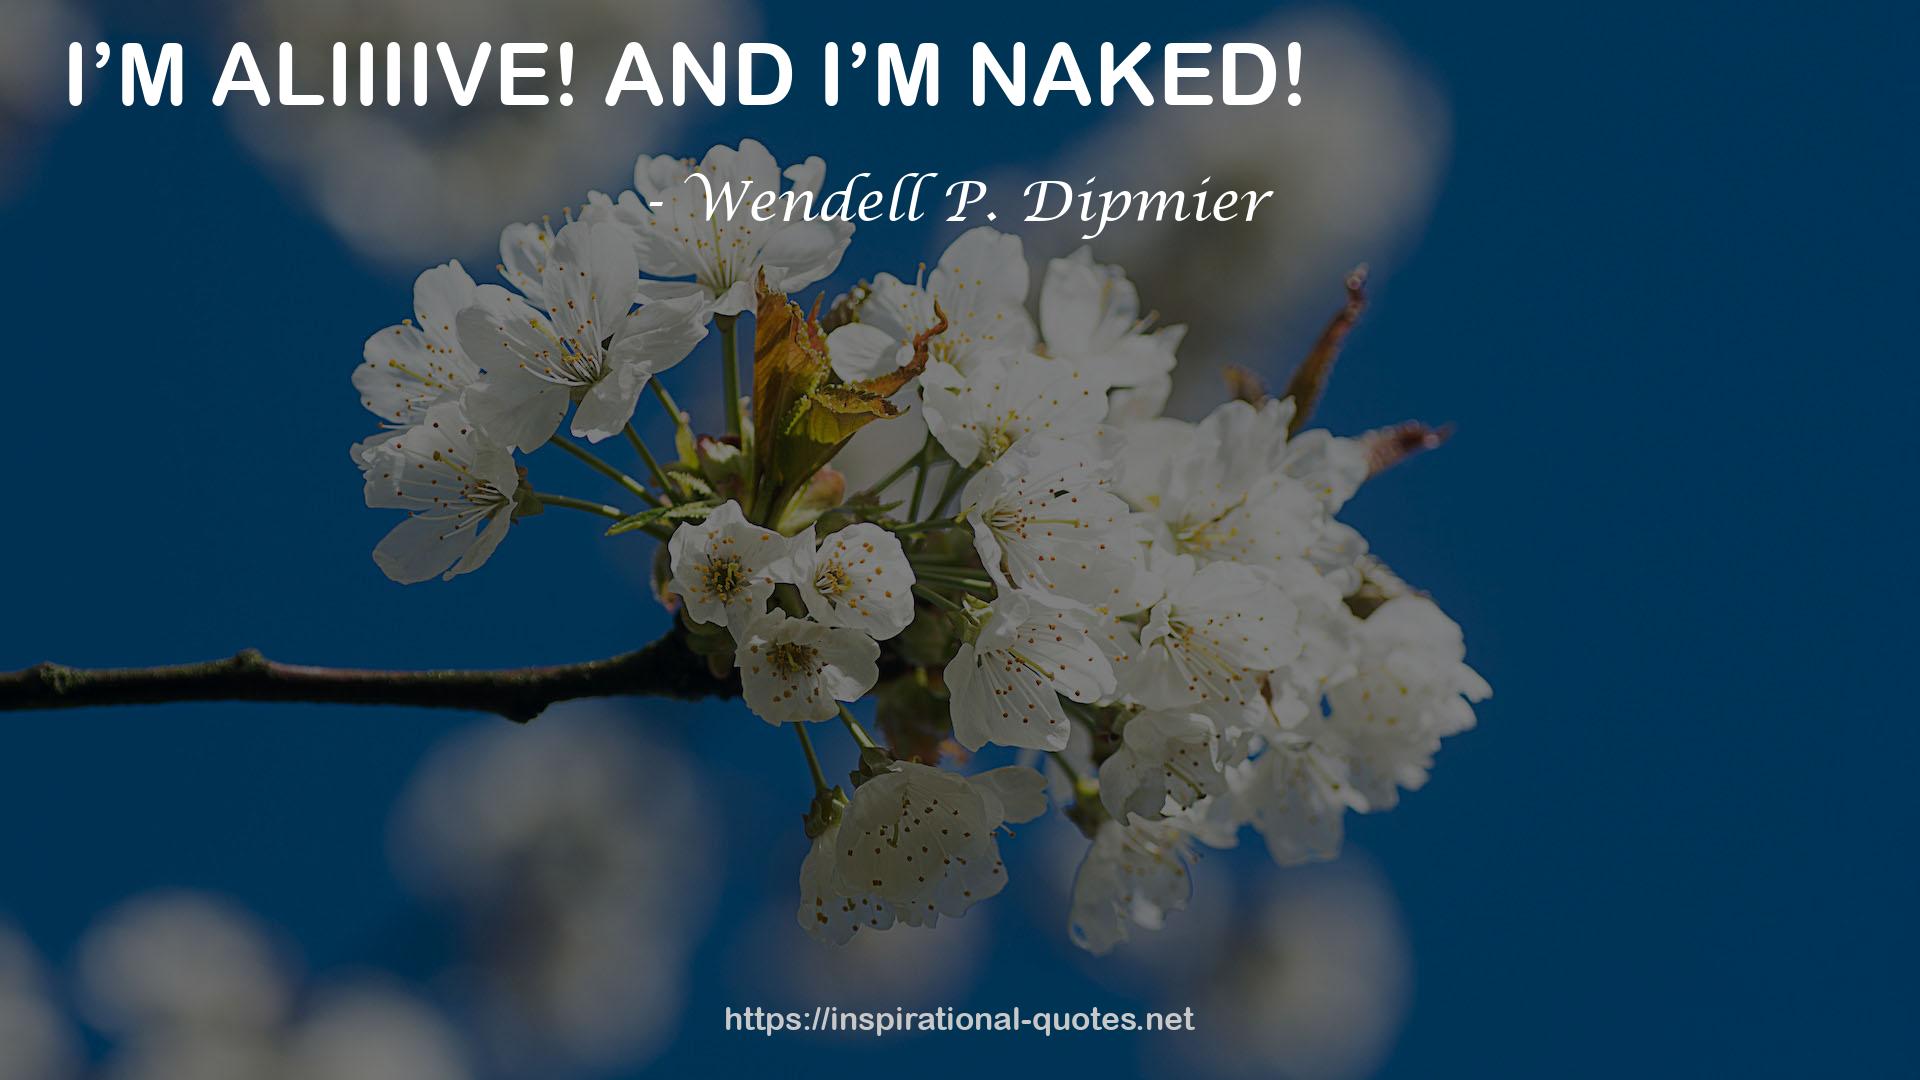 Wendell P. Dipmier QUOTES